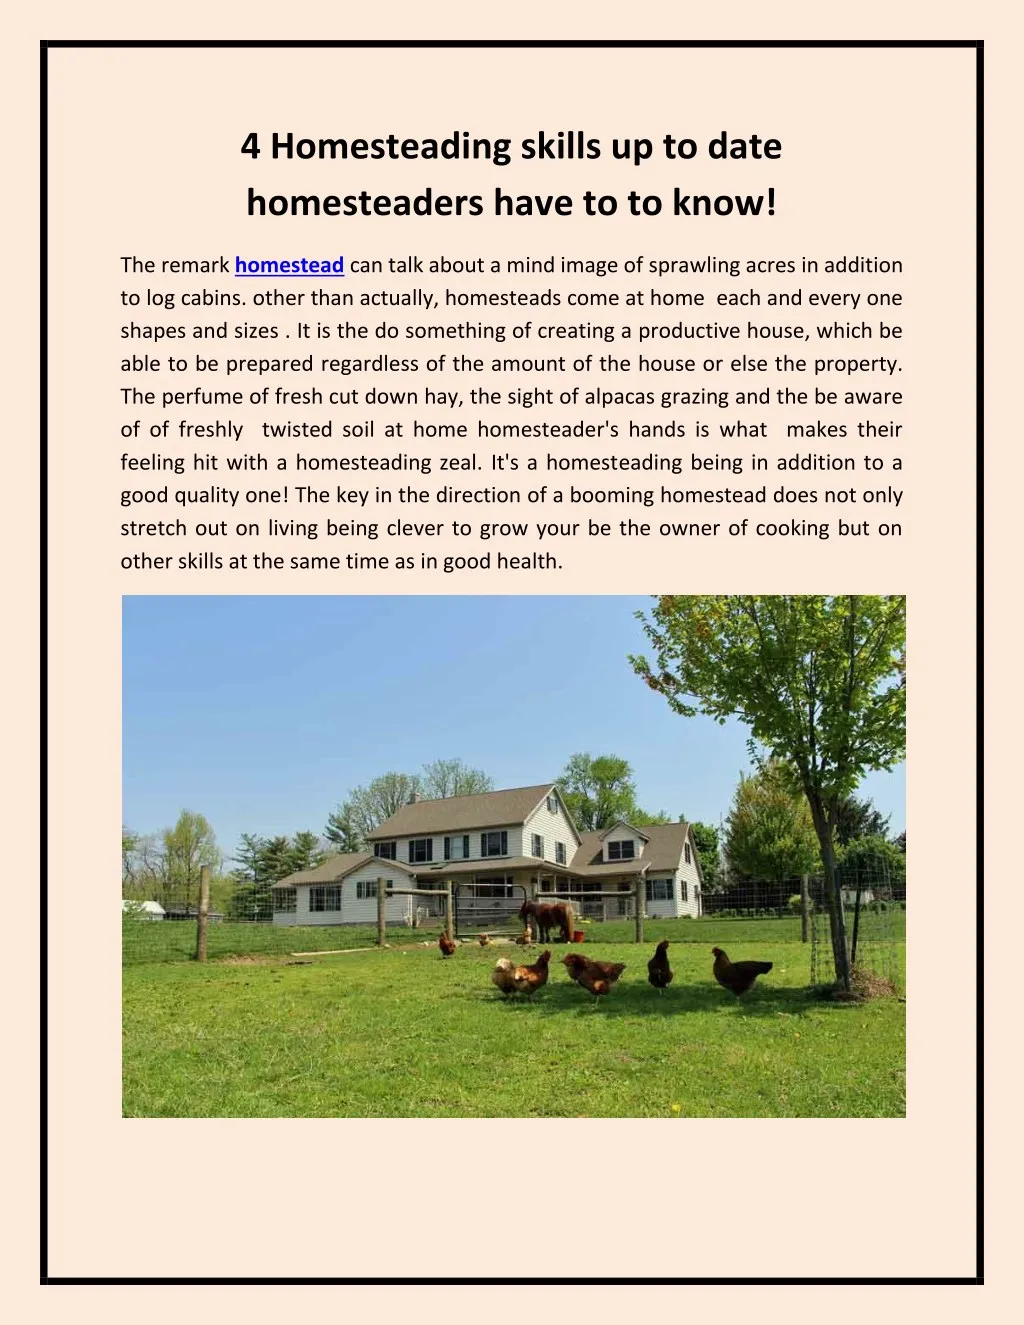 4 homesteading skills up to date homesteaders